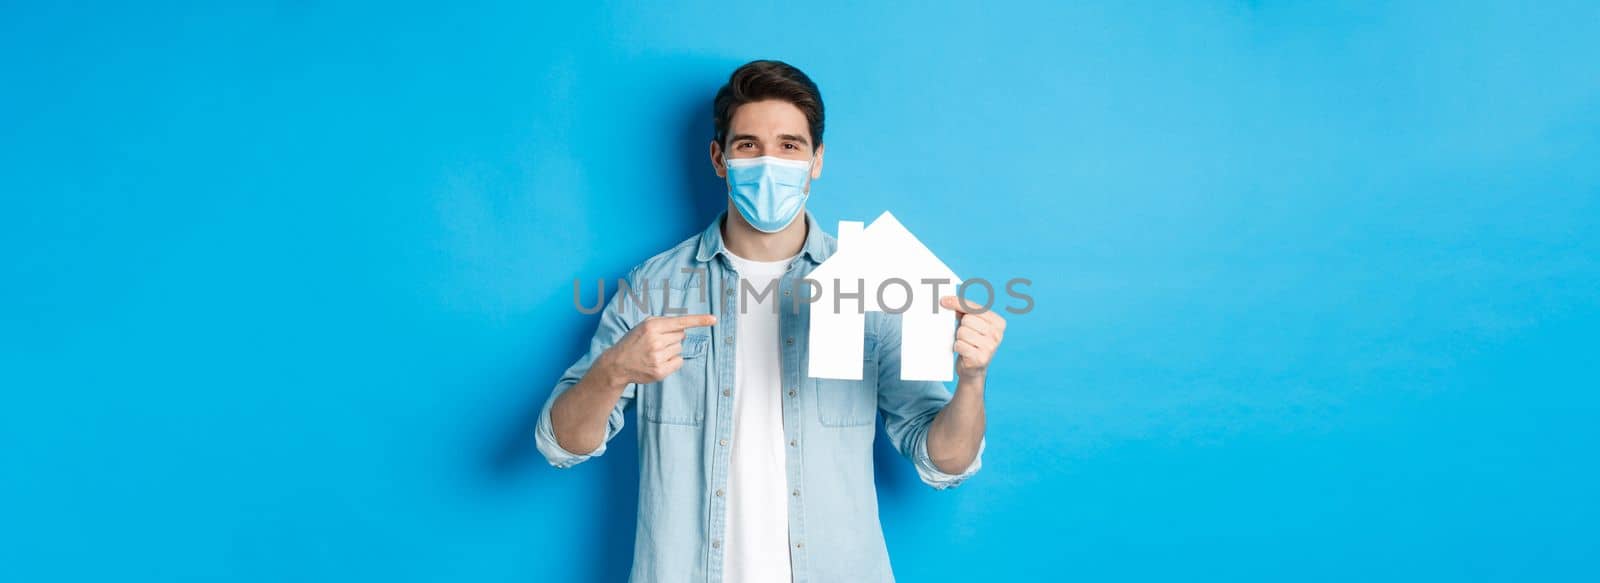 Concept of coronavirus, quarantine and social distancing. Young man searching aparment for rent, business loans, pointing at house model, wearing medical mask, blue background.